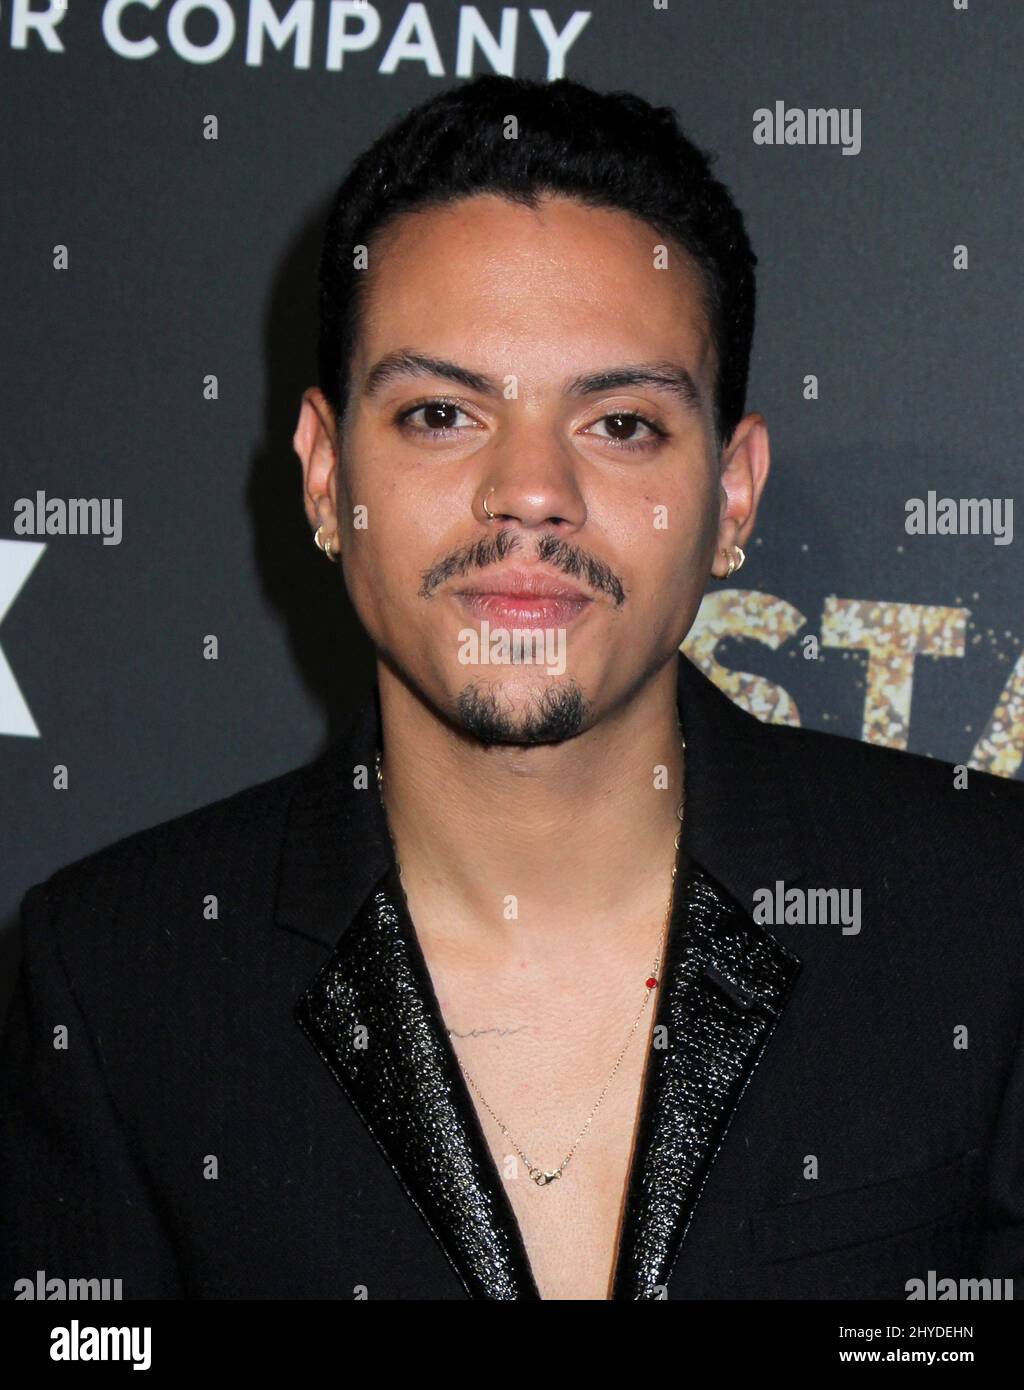 Evan Ross attending the 'Empire' and 'Star' Premiere Celebration Held ...